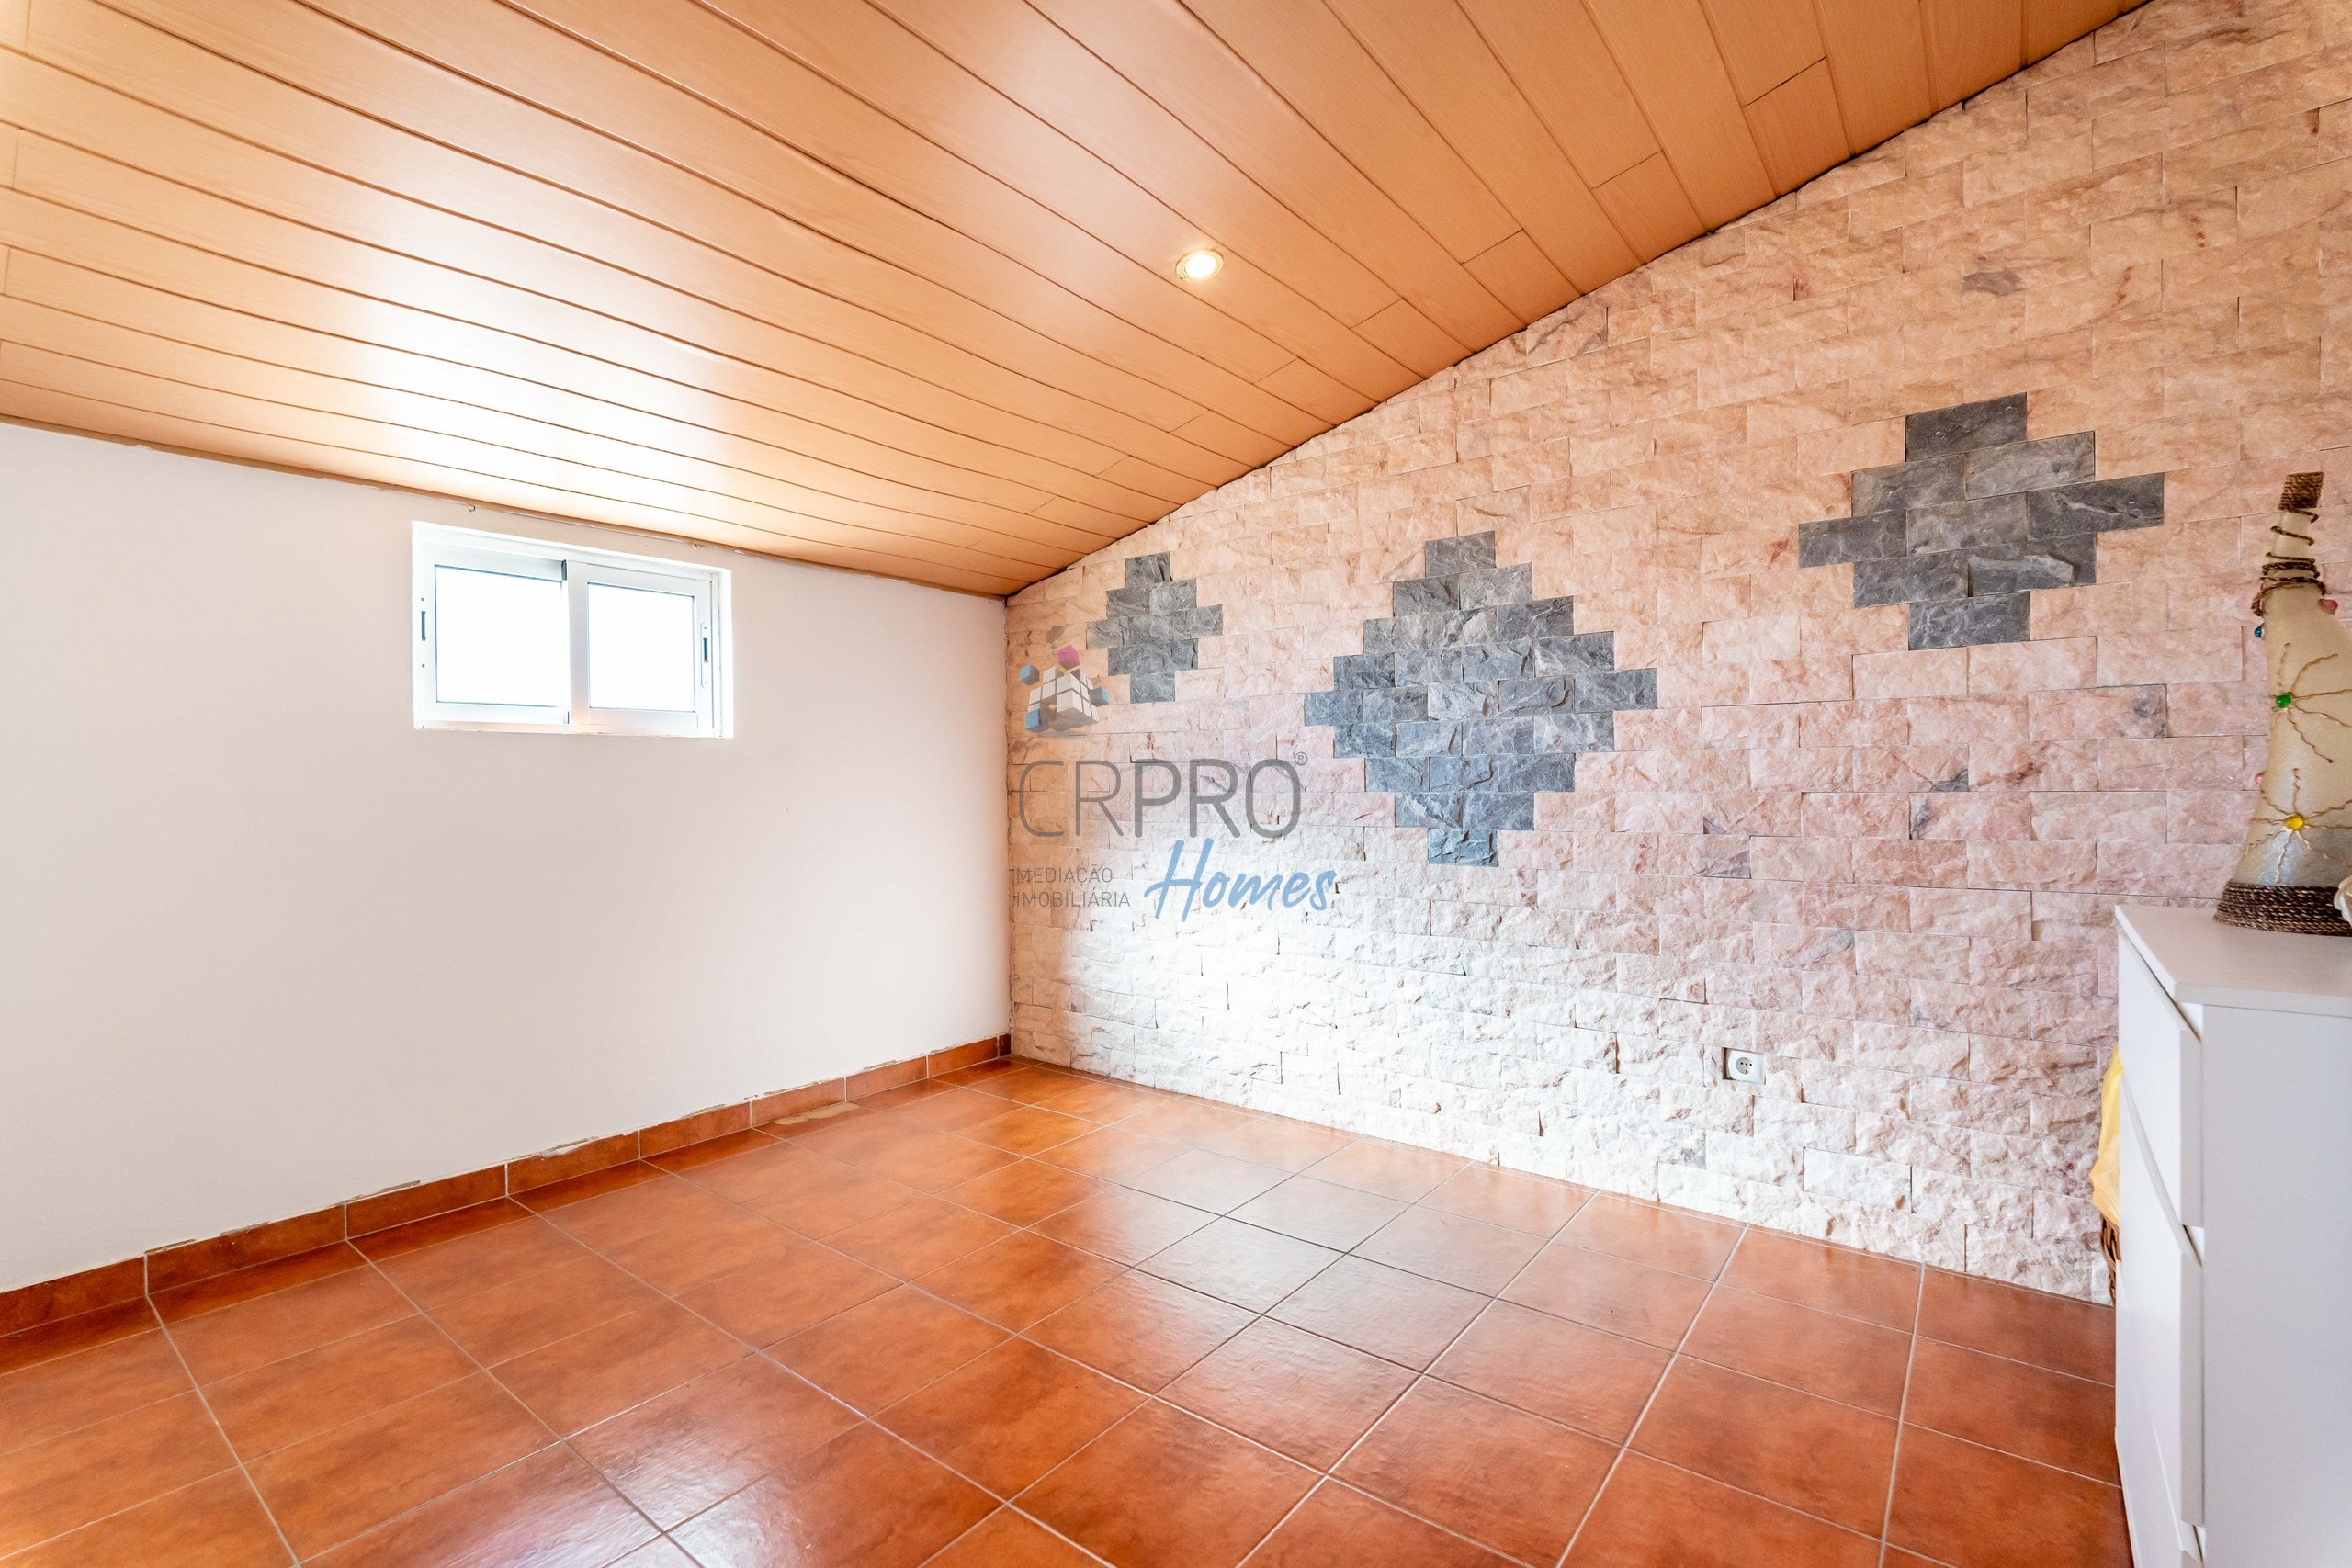 T2+2 semi-detached house for sale, located in the Caliços residential area in Albufeira. 